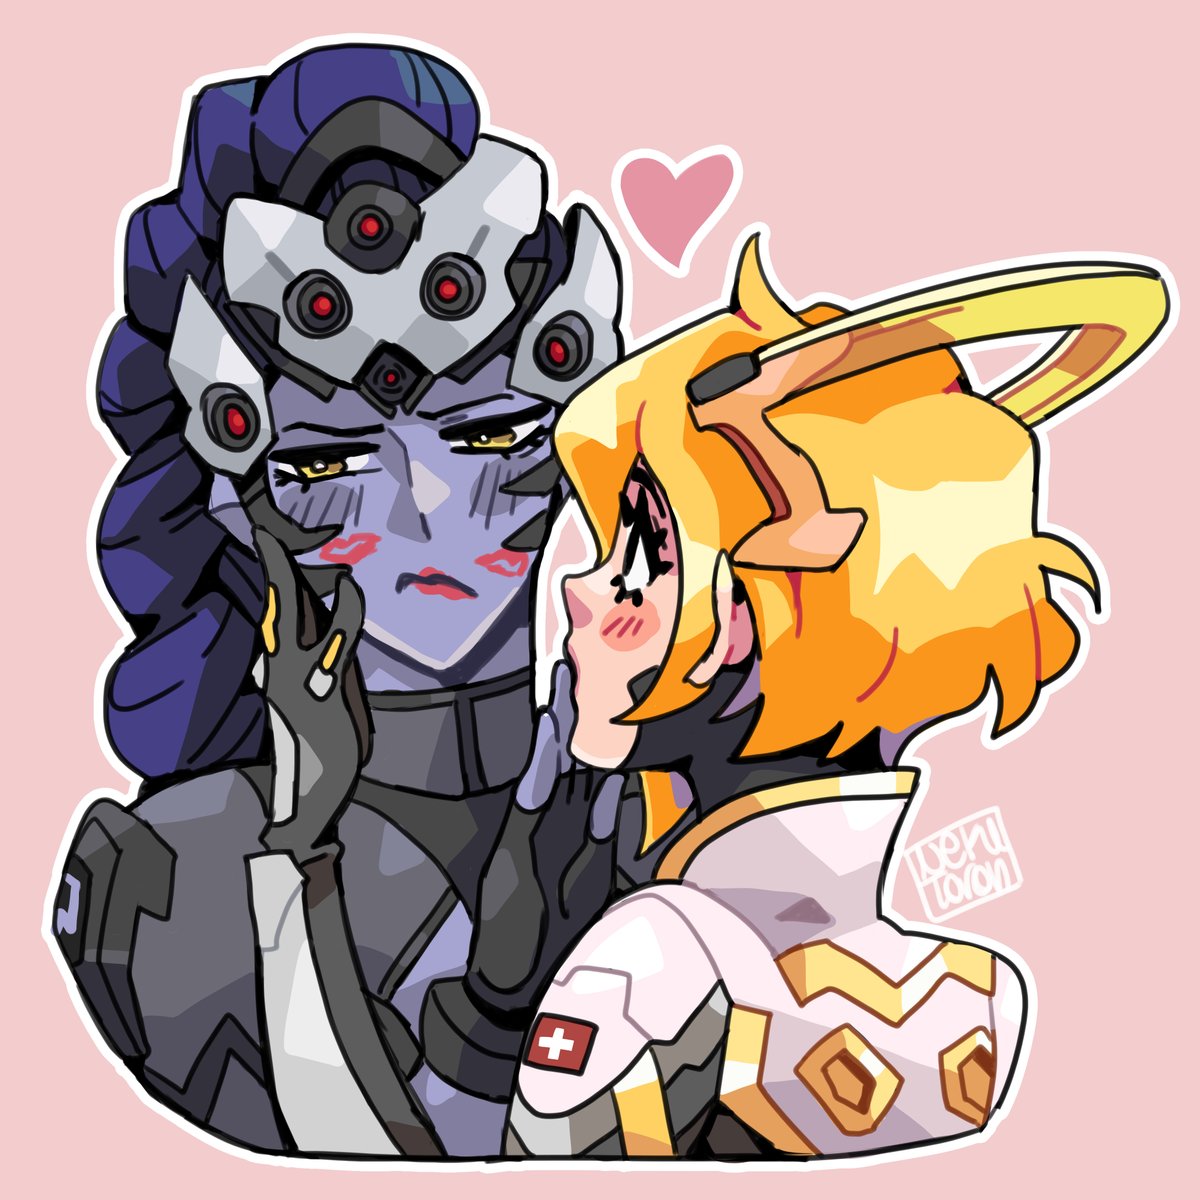 Mercy wishing Widow a happy birthday, she knows that it only takes a little love to make the sniper smile one day 🤭🤭🤭
#mercymaker #Overwatch2